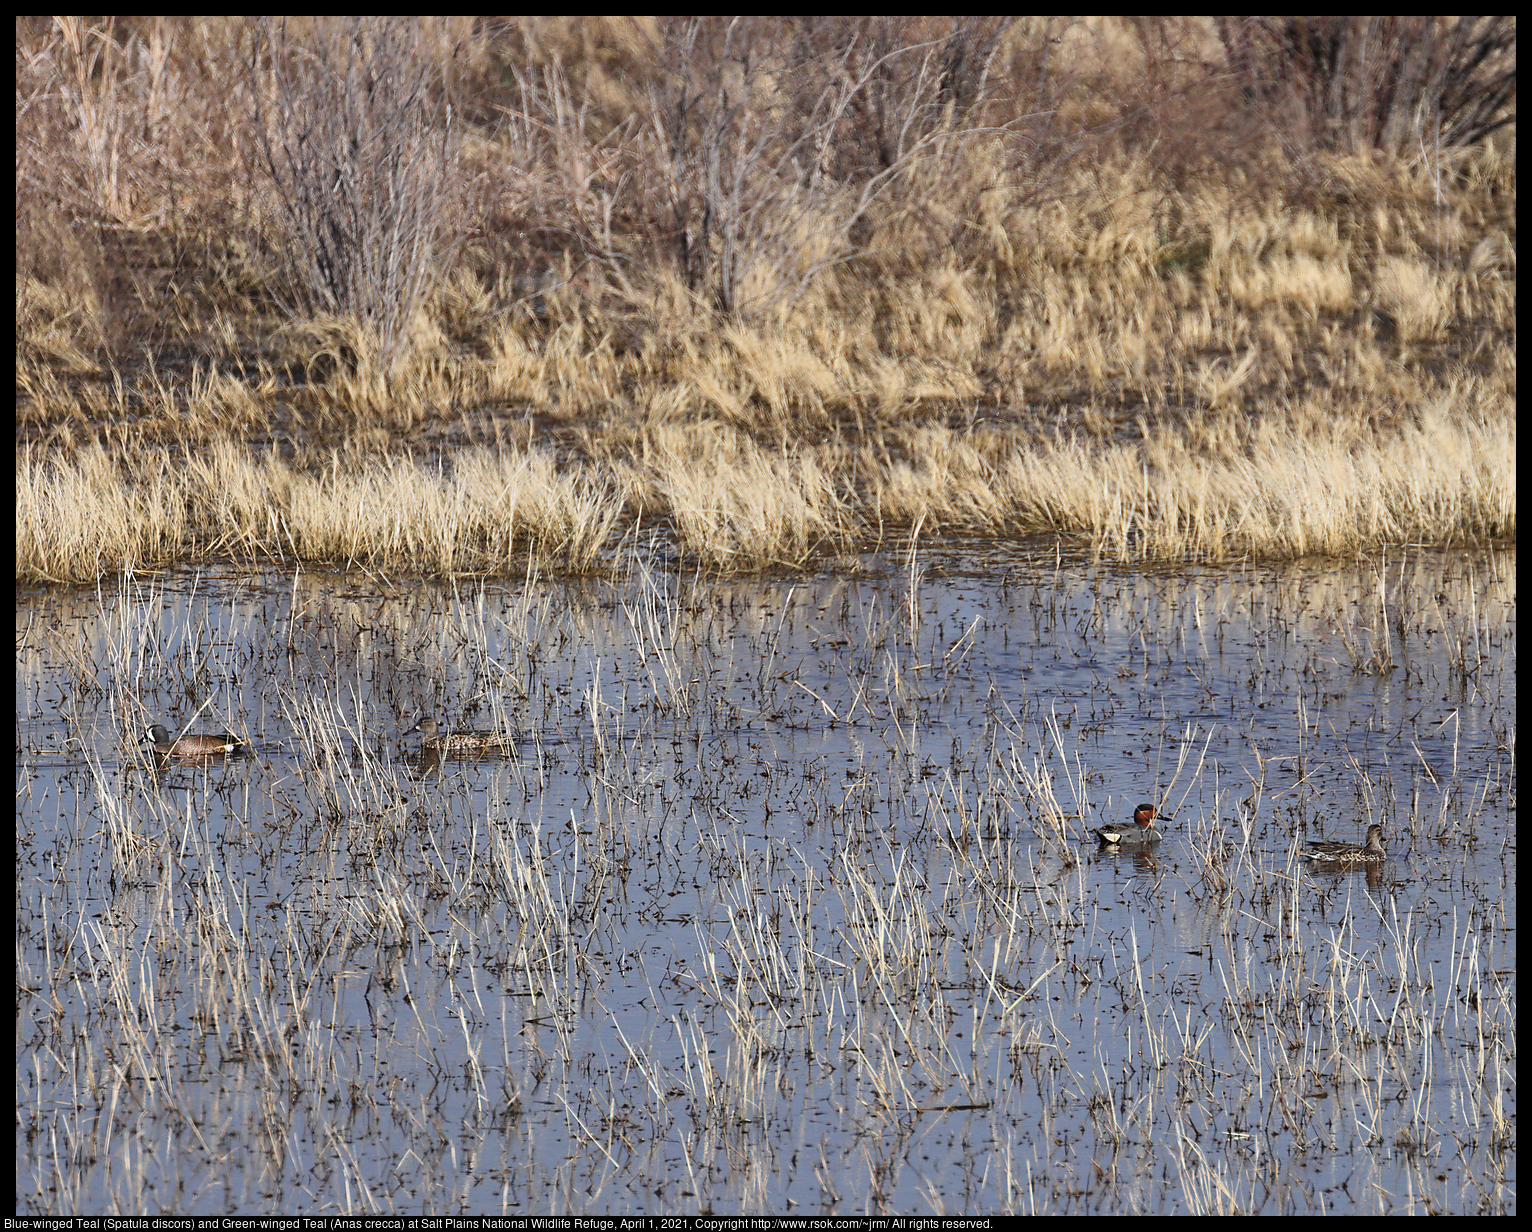 Blue-winged Teal (Spatula discors) and Green-winged Teal (Anas crecca) at Salt Plains National Wildlife Refuge, April 1, 2021